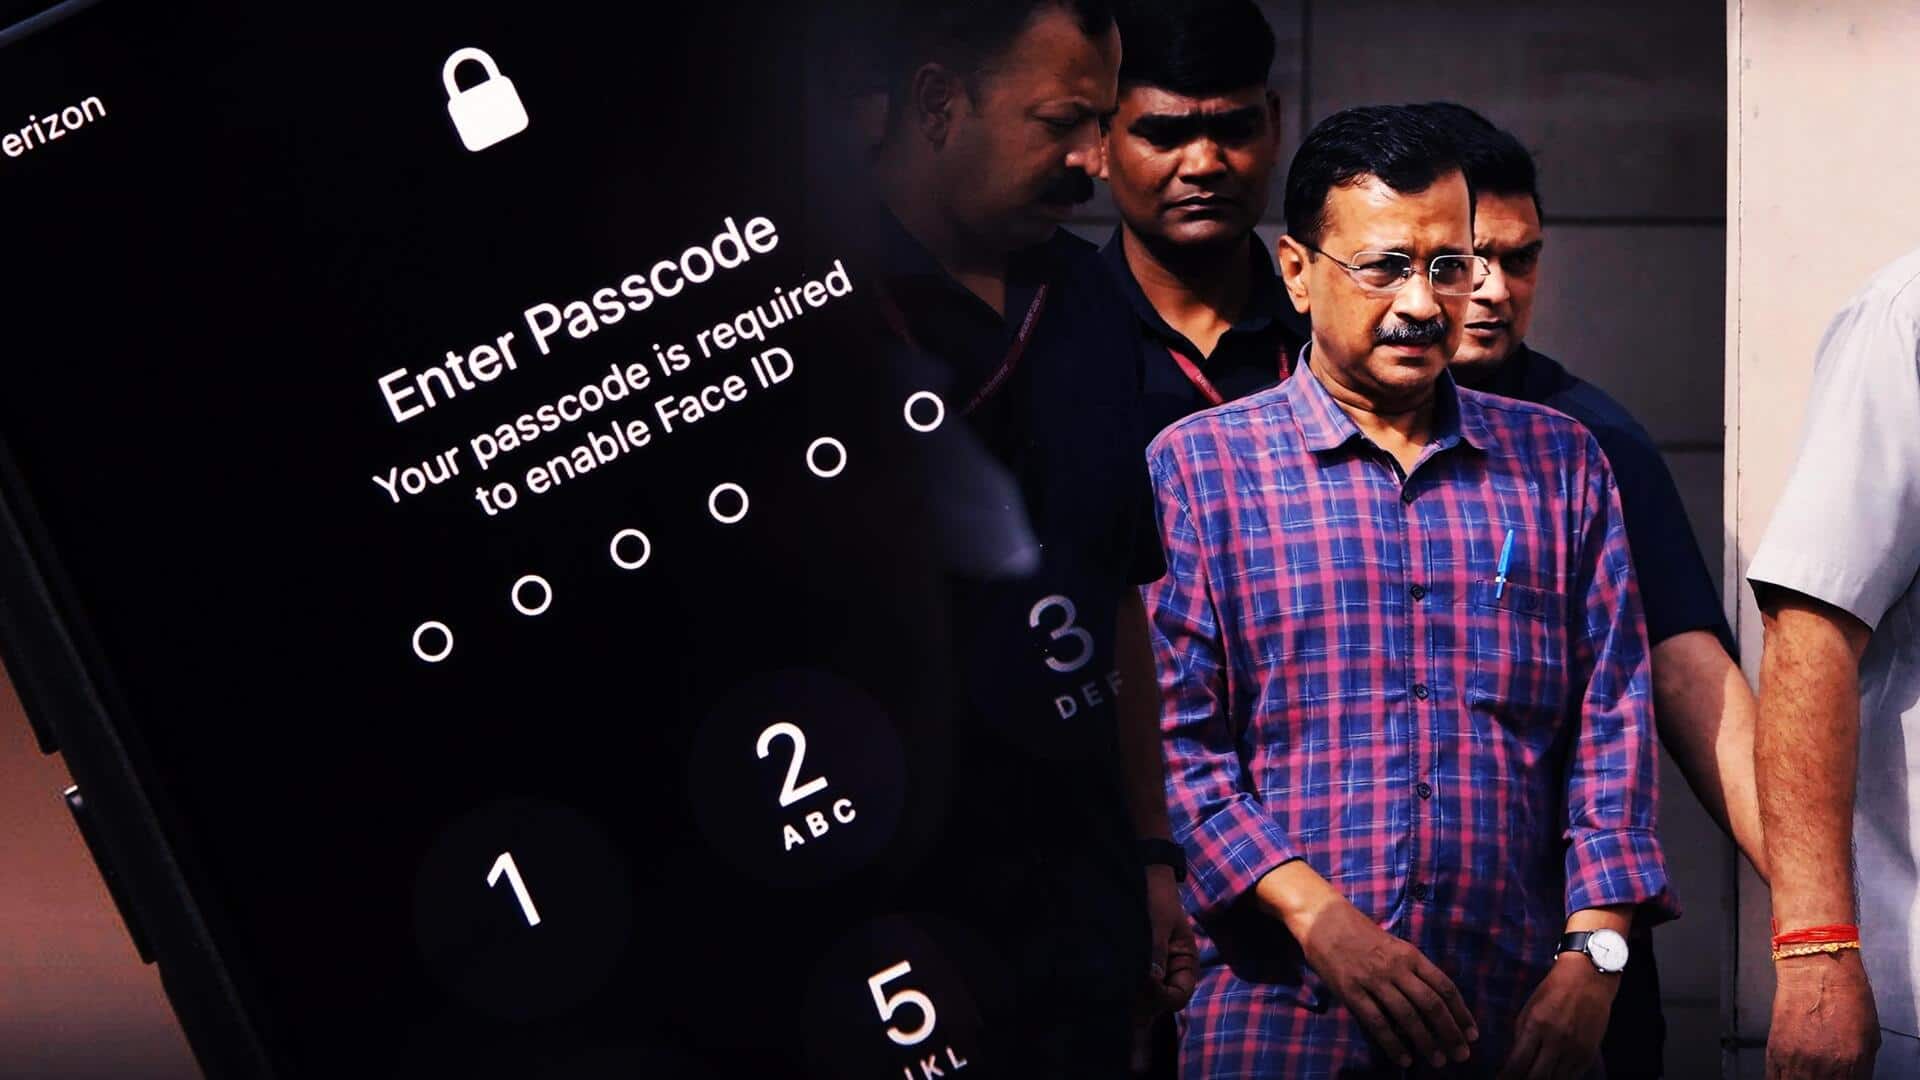 Explained: Why Apple declined ED's request to unlock Kejriwal's iPhone